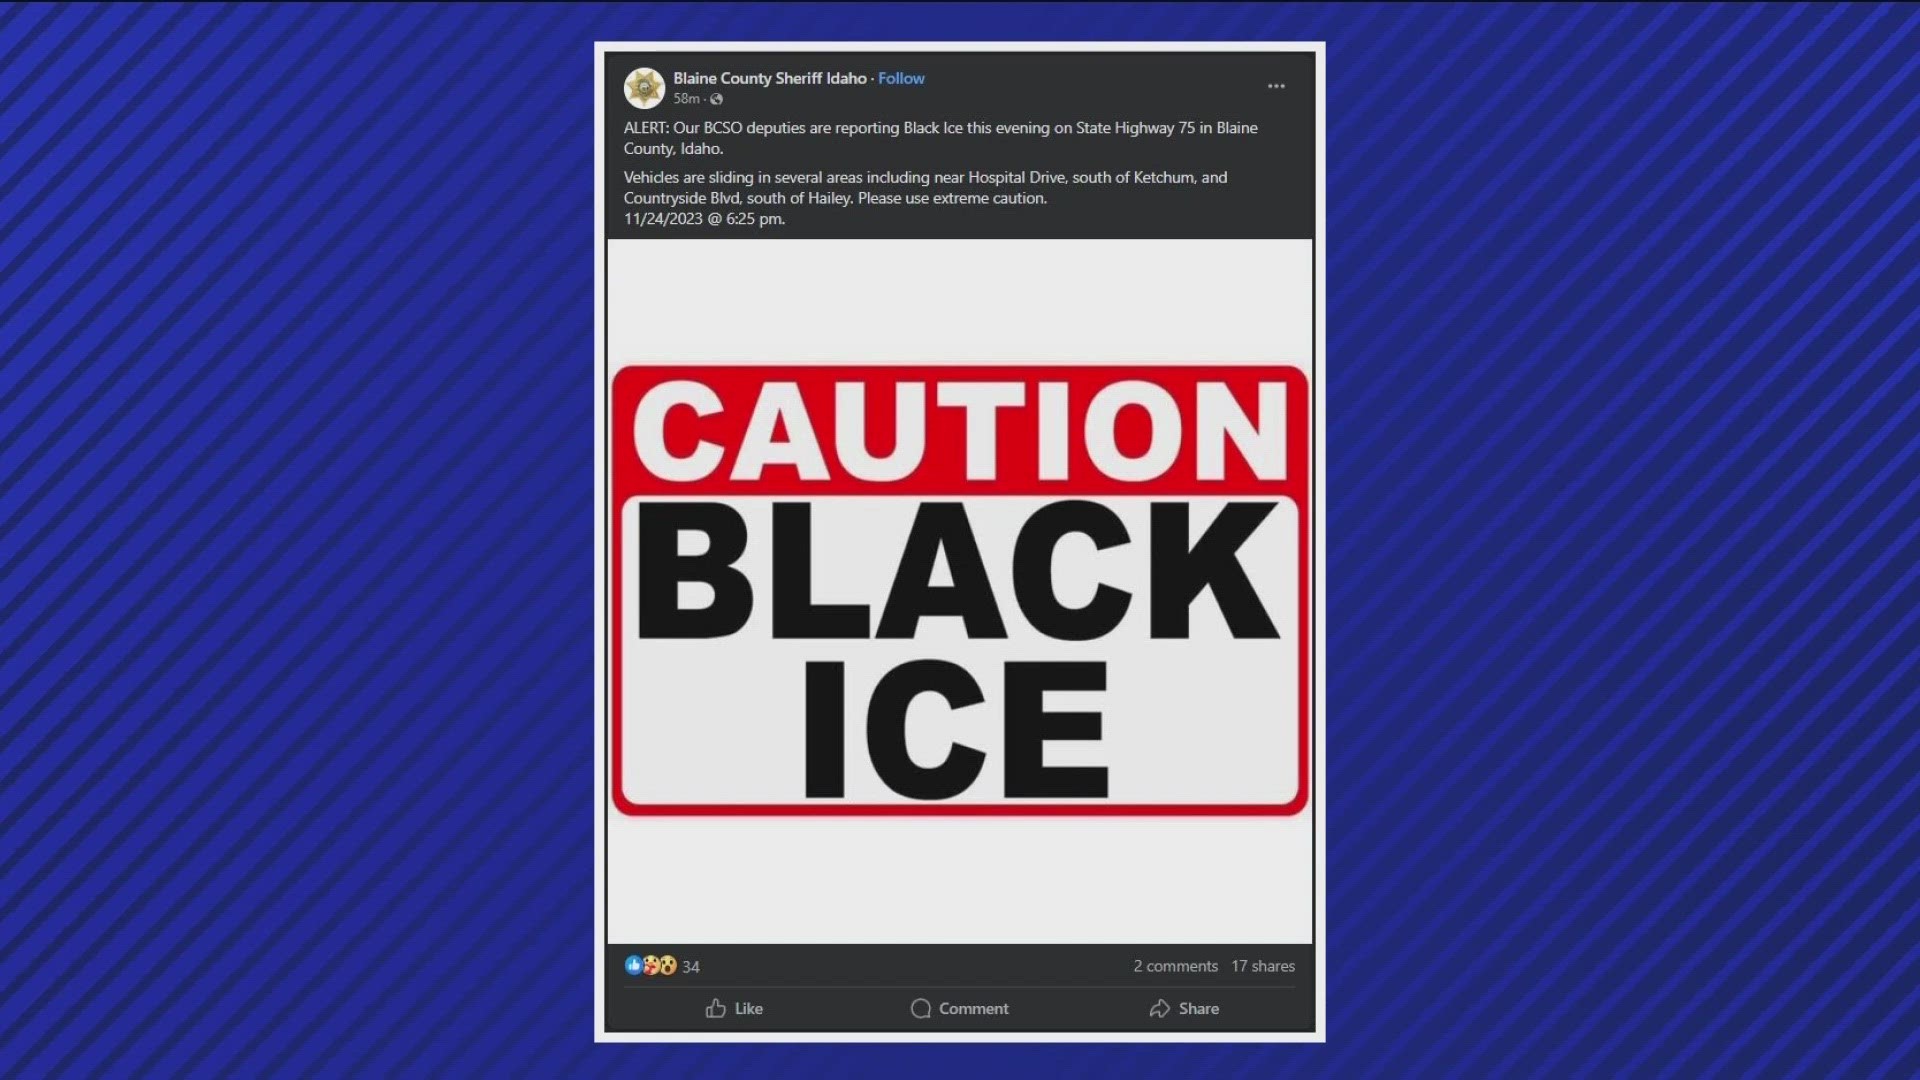 The Blaine County Sheriff's Office said cars are sliding on the road due to black ice.